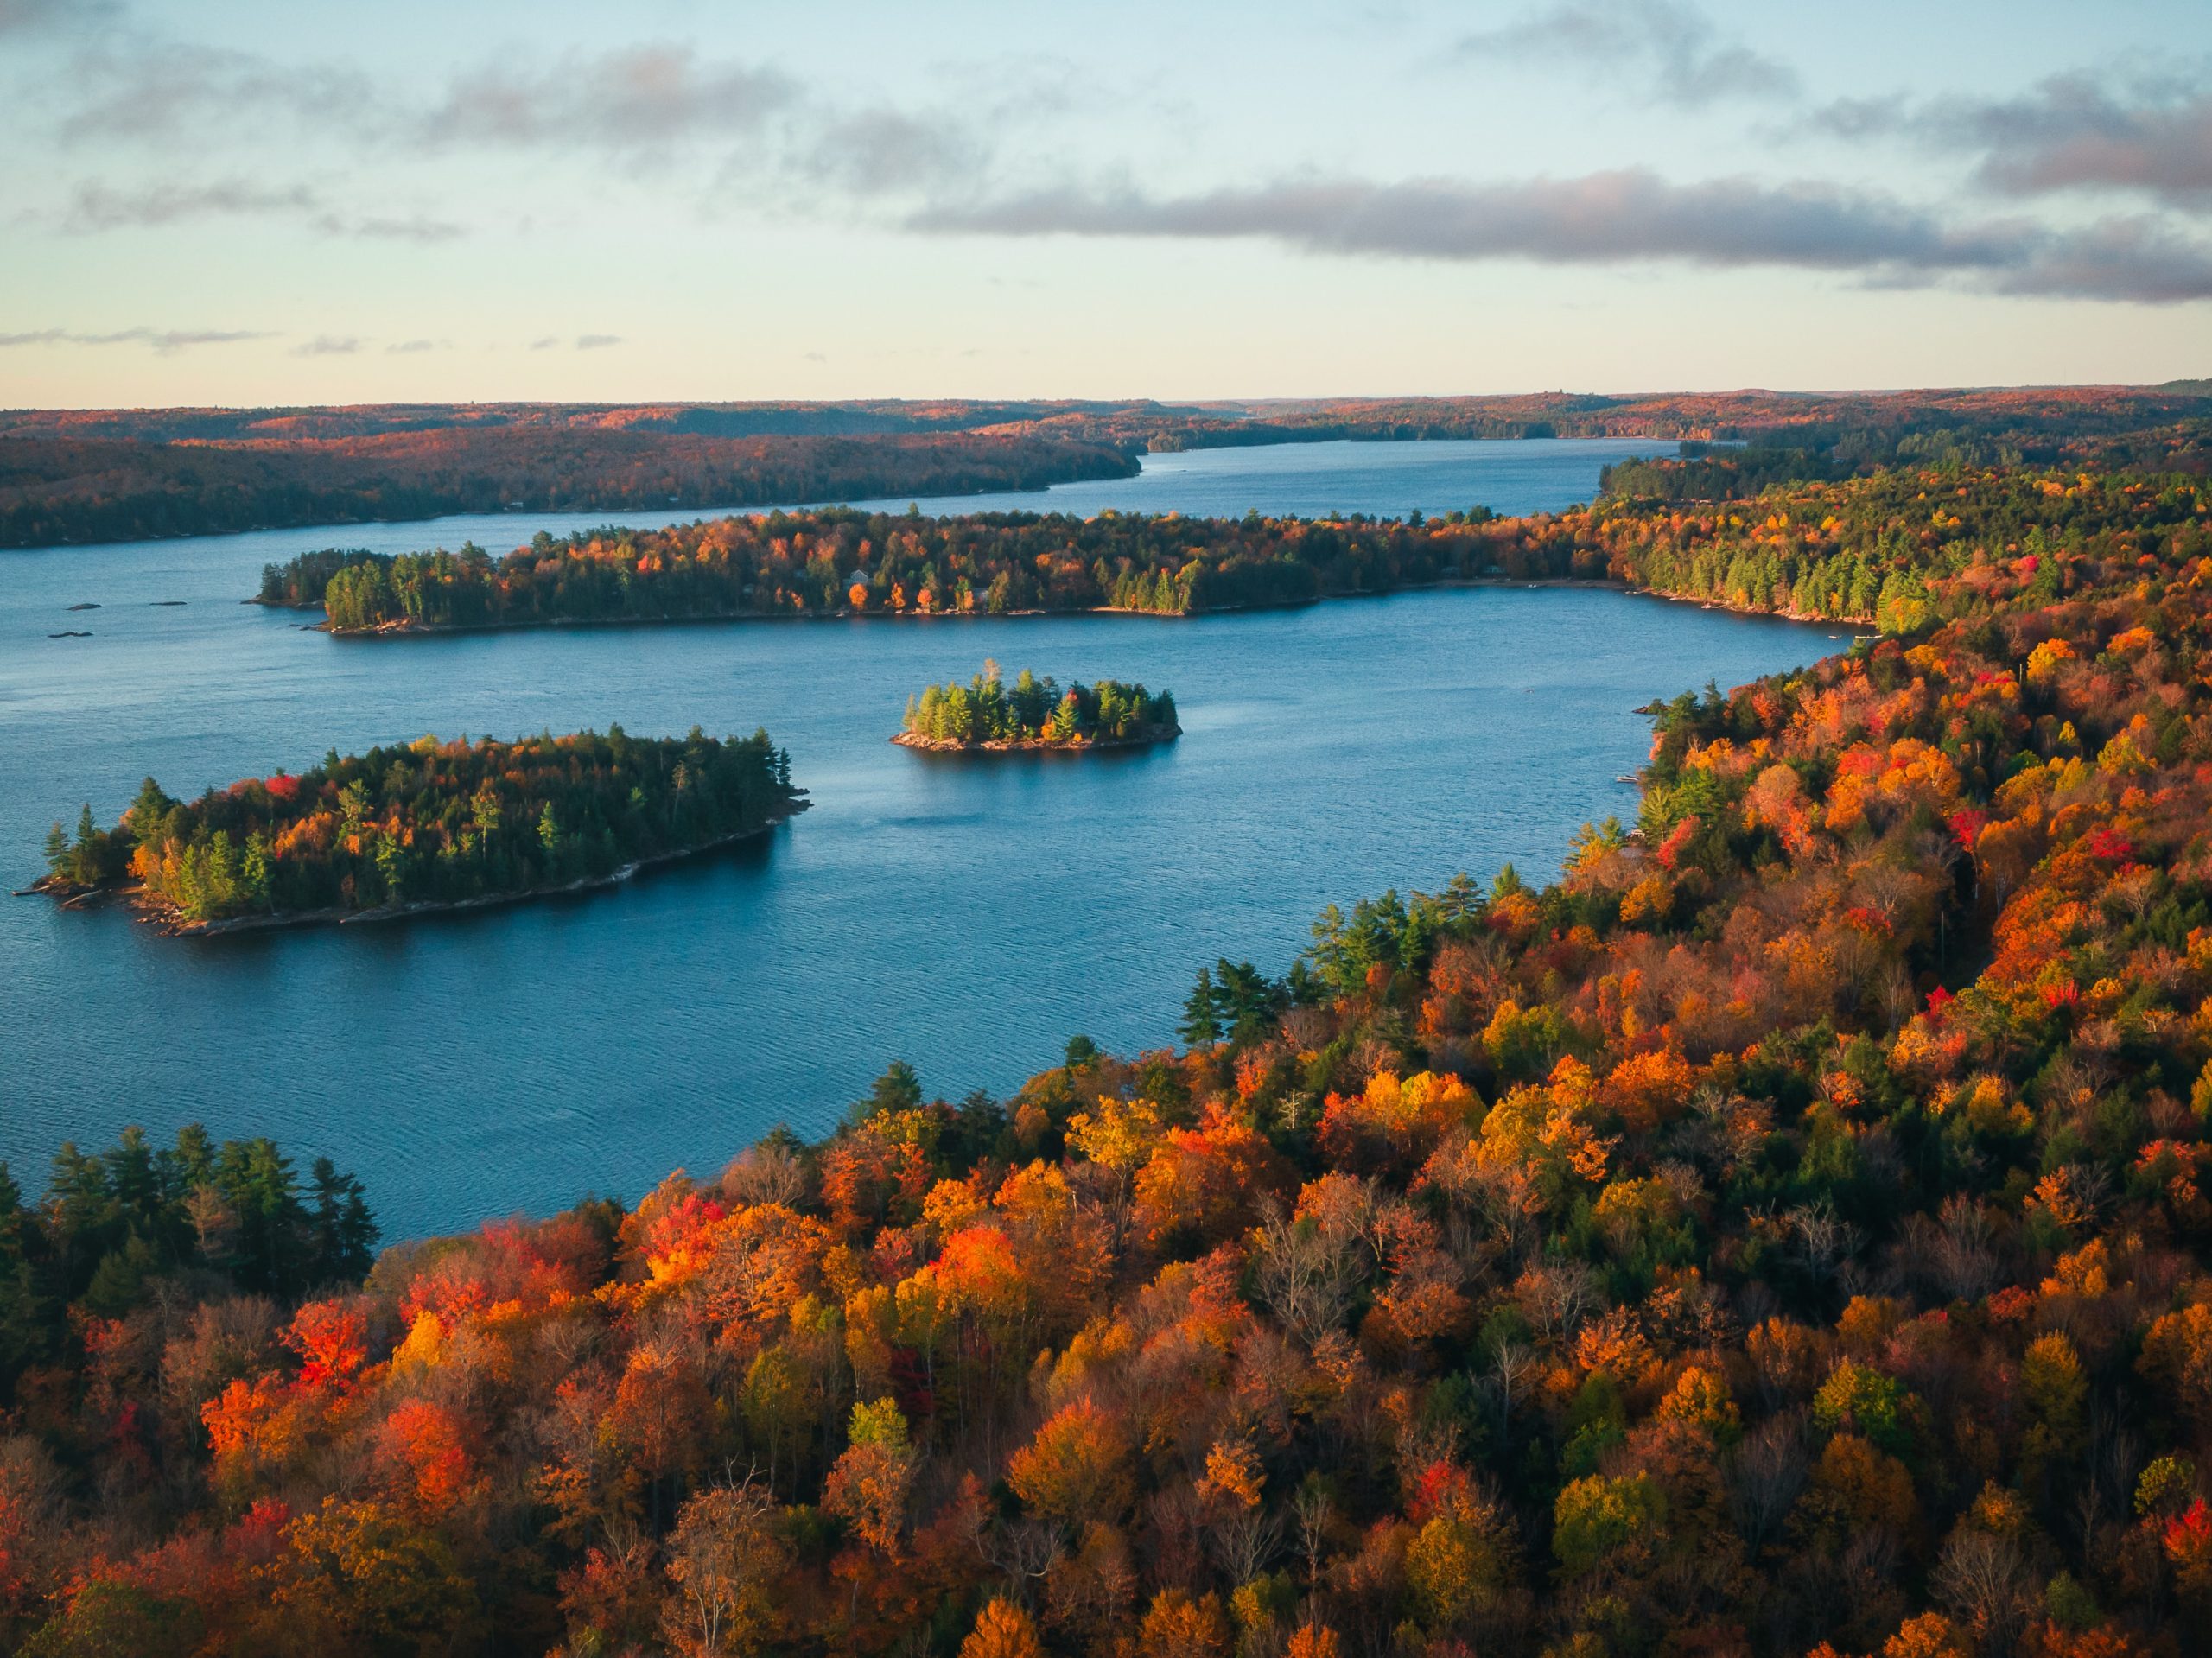 View of fall trees, lake, islands, and sky